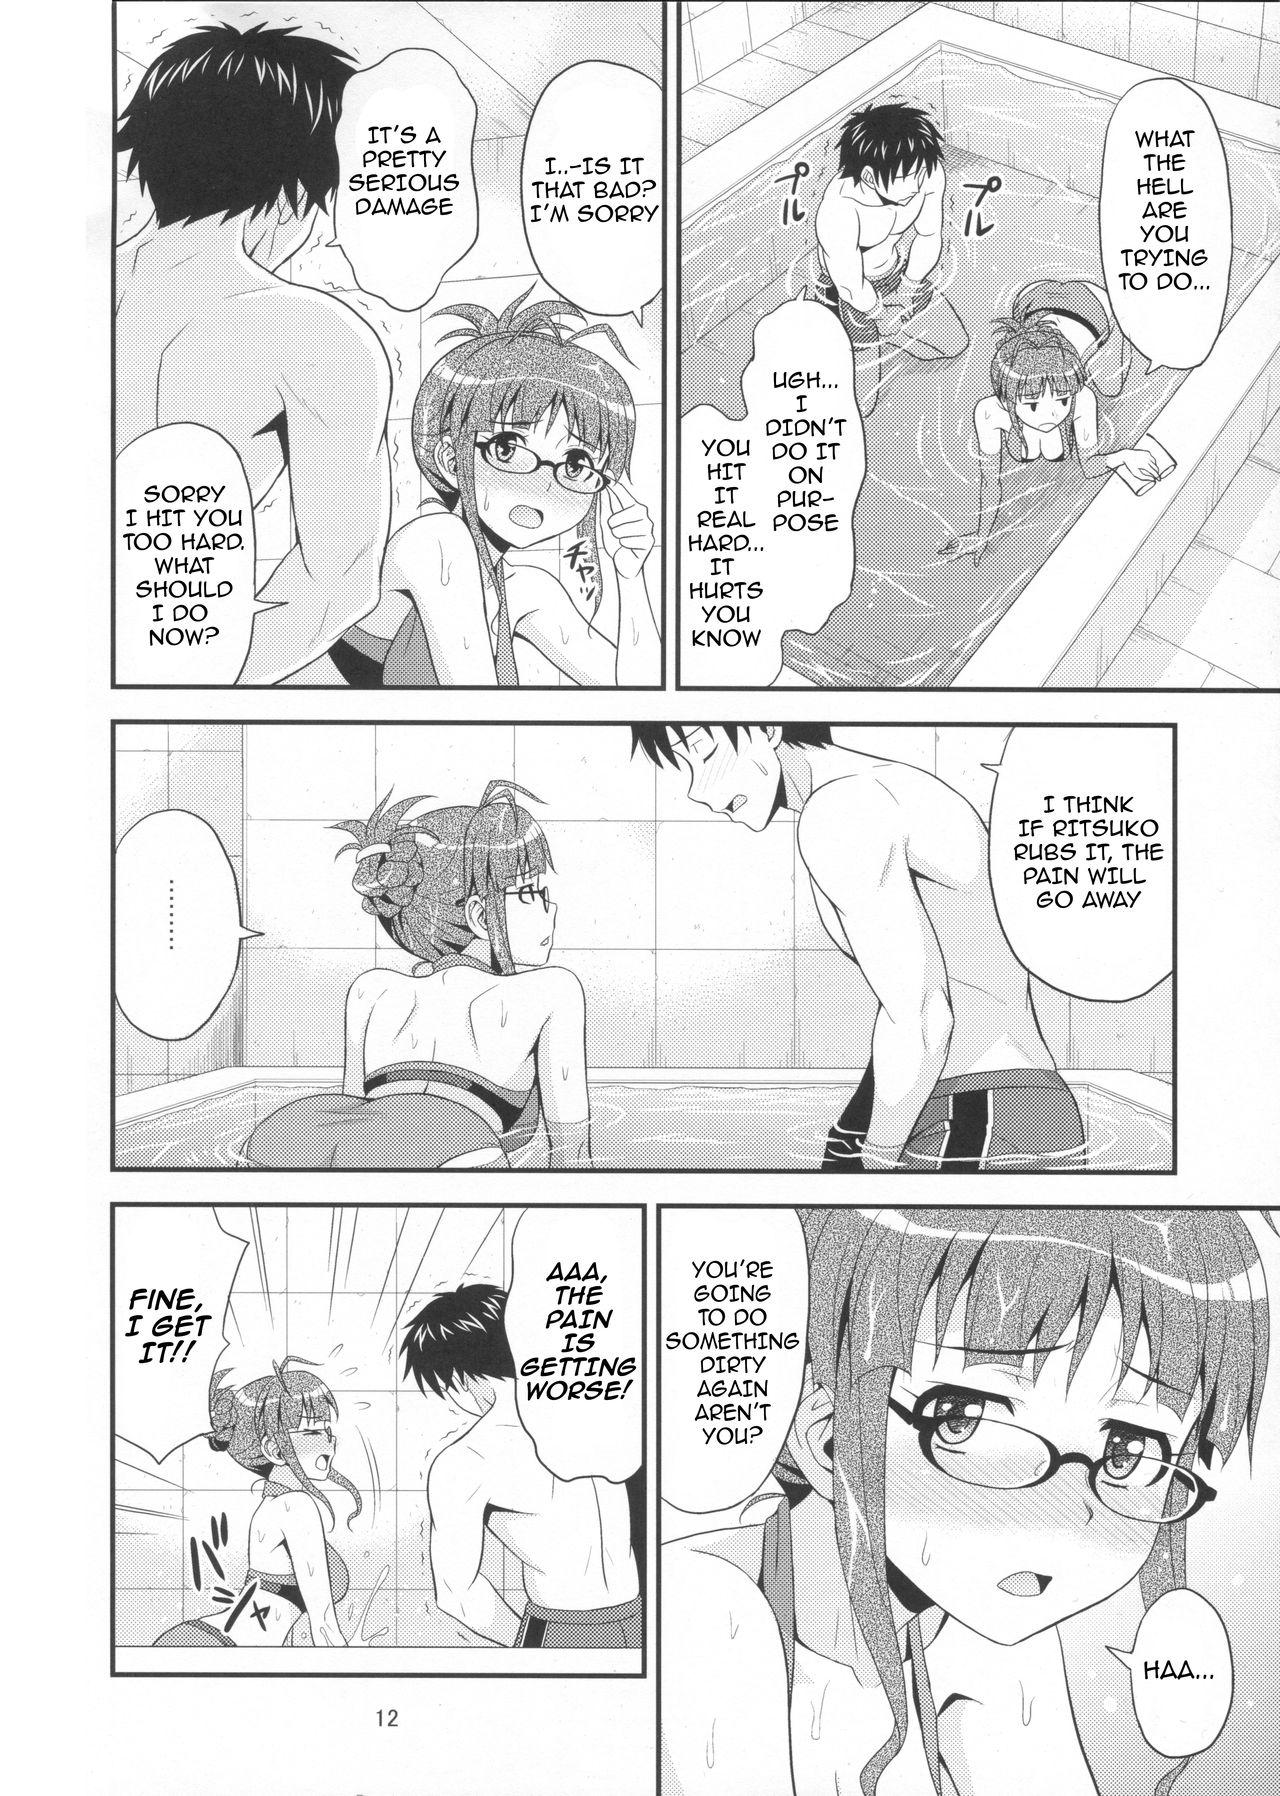 Cachonda Training for You! - The idolmaster Celebrity Nudes - Page 12